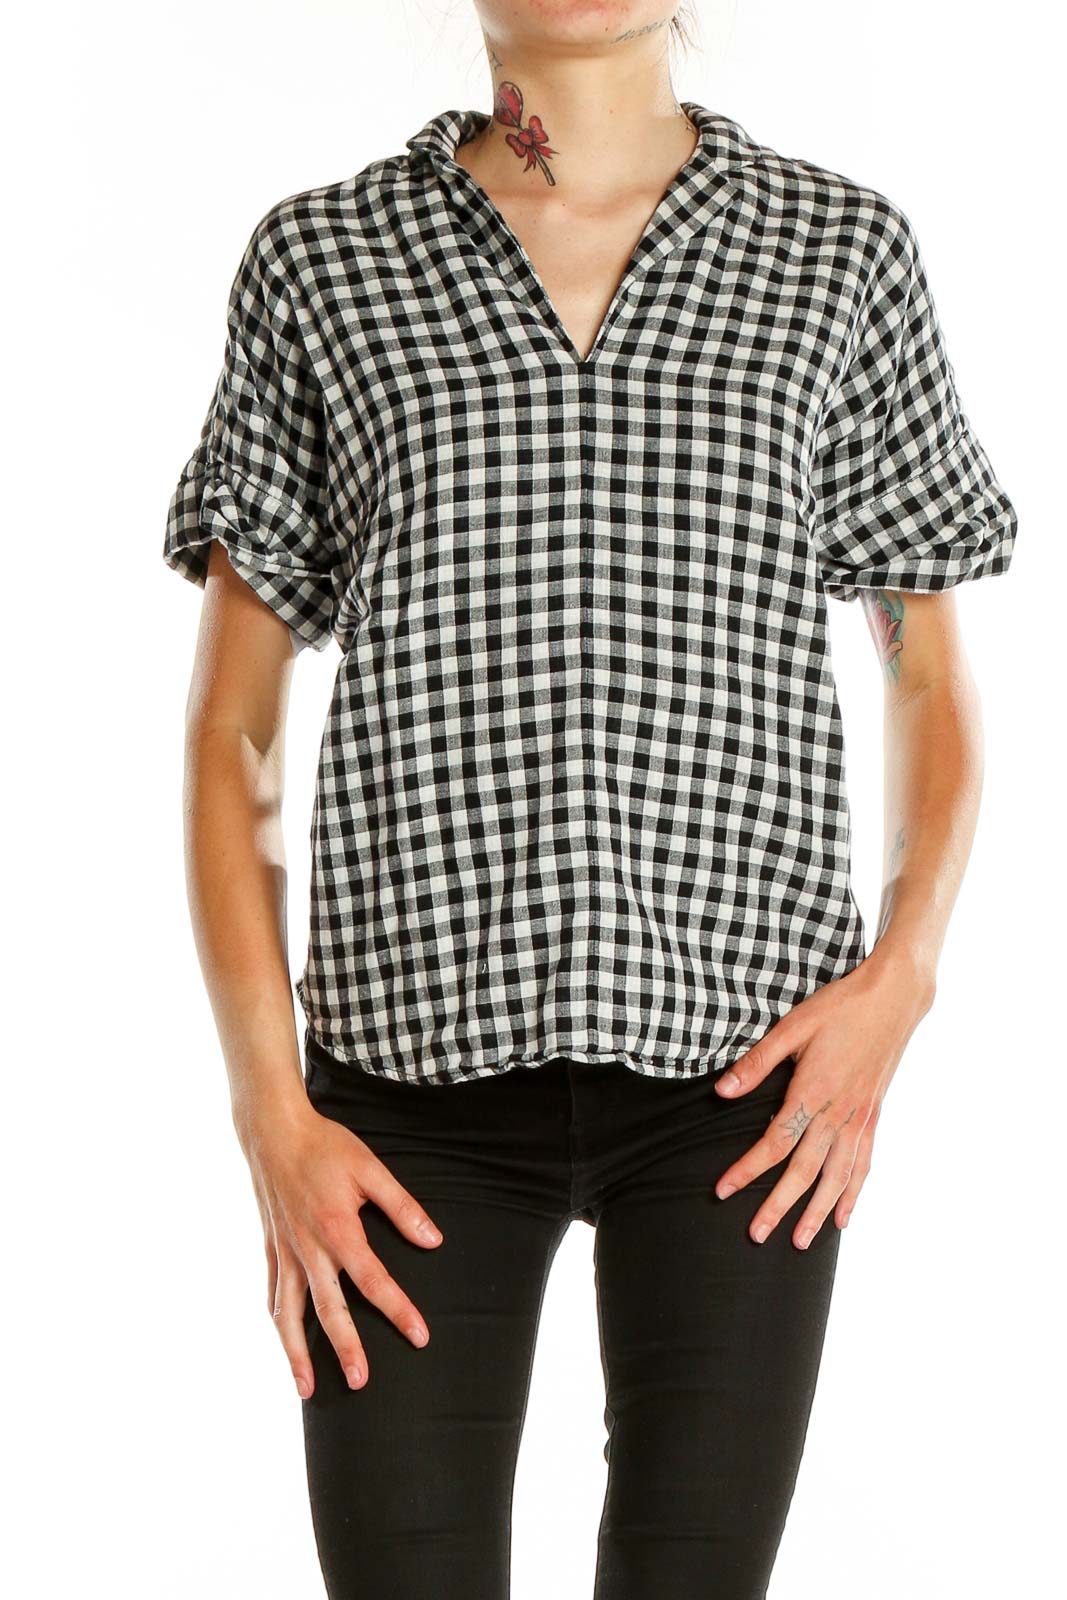 White Black Checkered All Day Wear Top Front